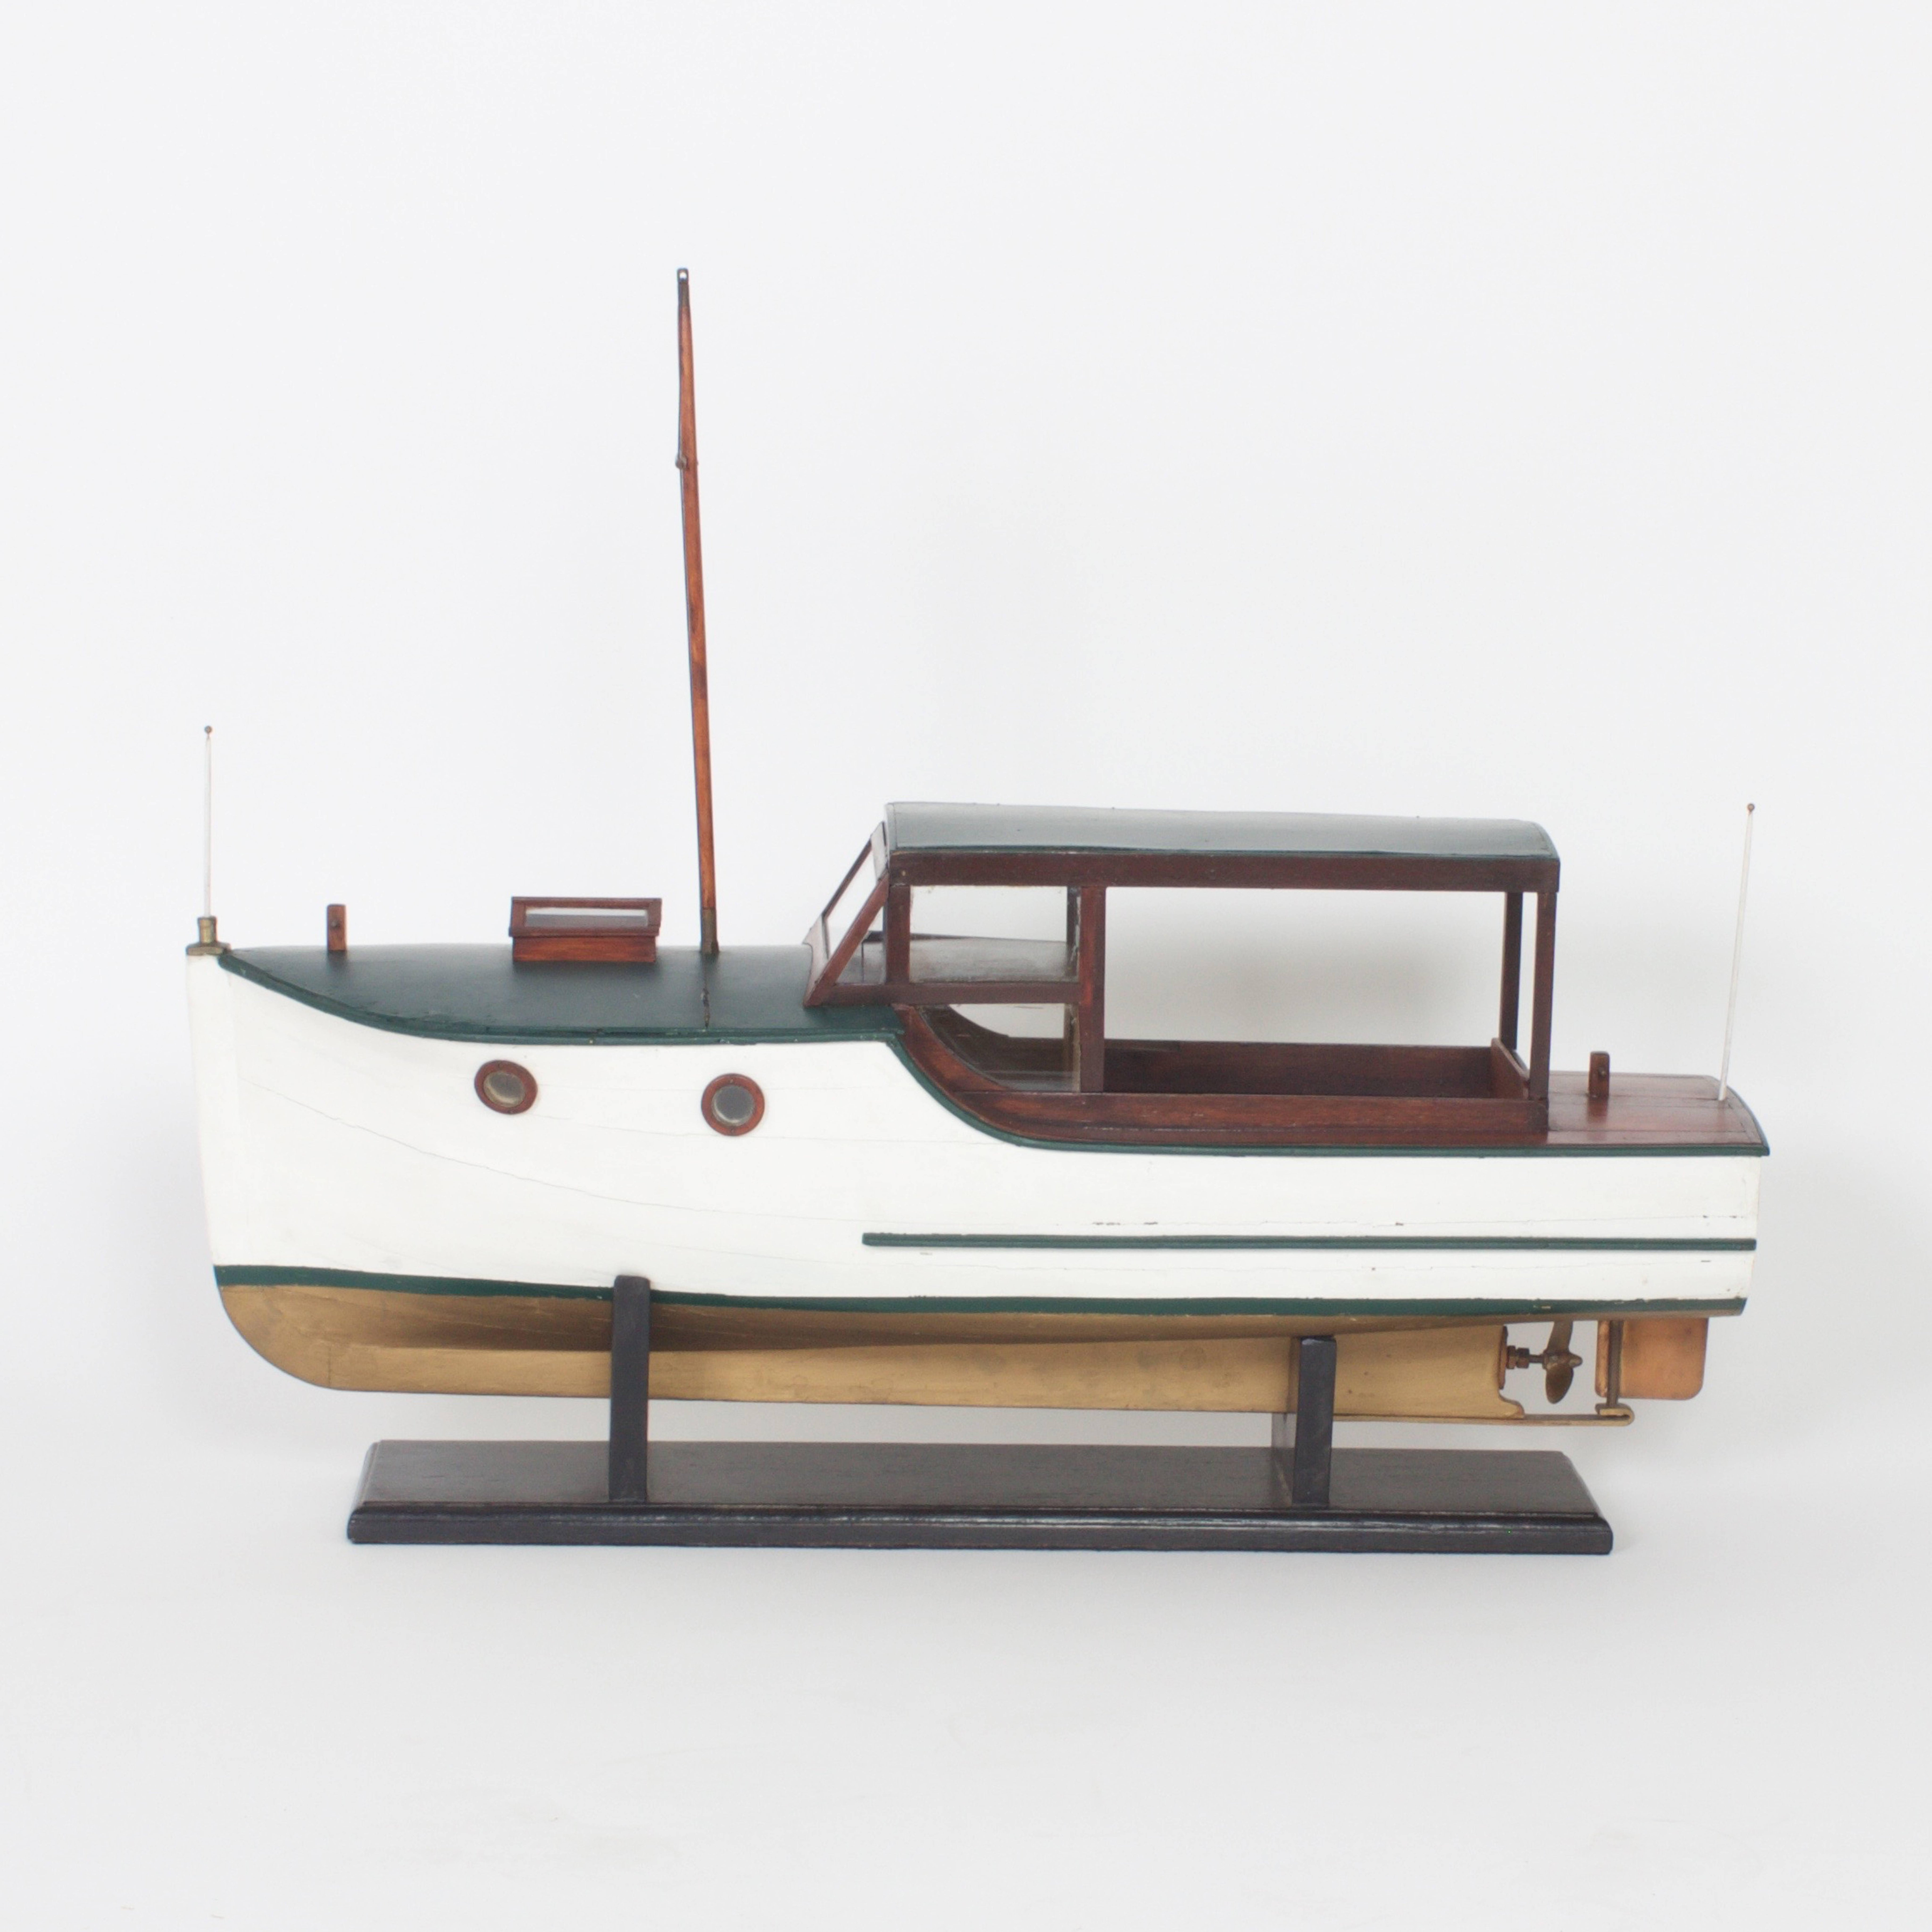 Folky wood model of a cabin cruiser, handcrafted with affection. The use of mahogany and Classic nautical palette make this boat an easy addition to island, coastal, or any style of living where a boat lover resides. 

.